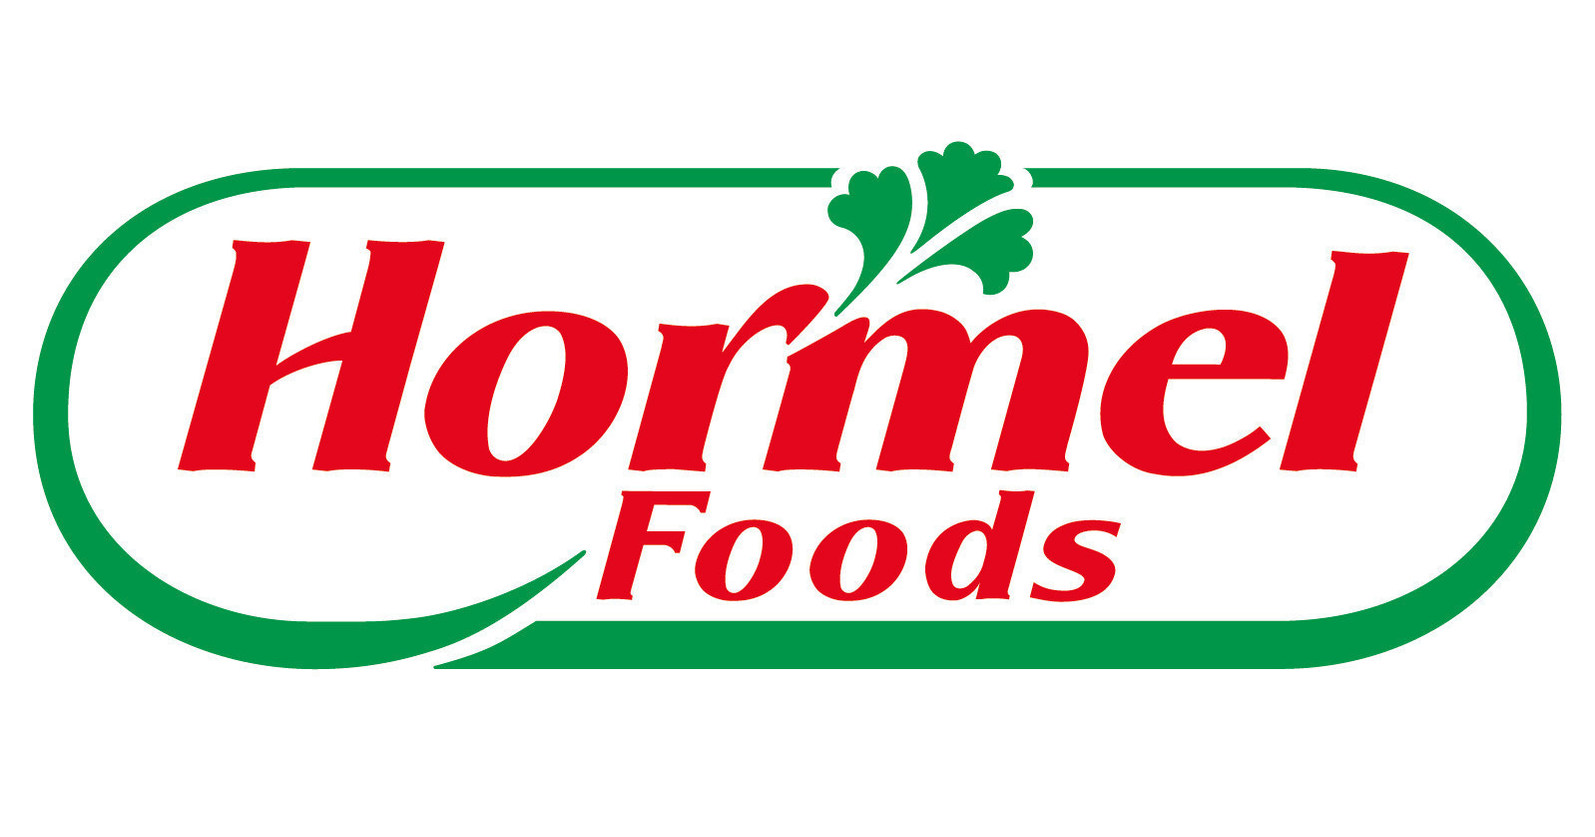 Hormel Foods Named One of the Top Corporate Citizens in the United States